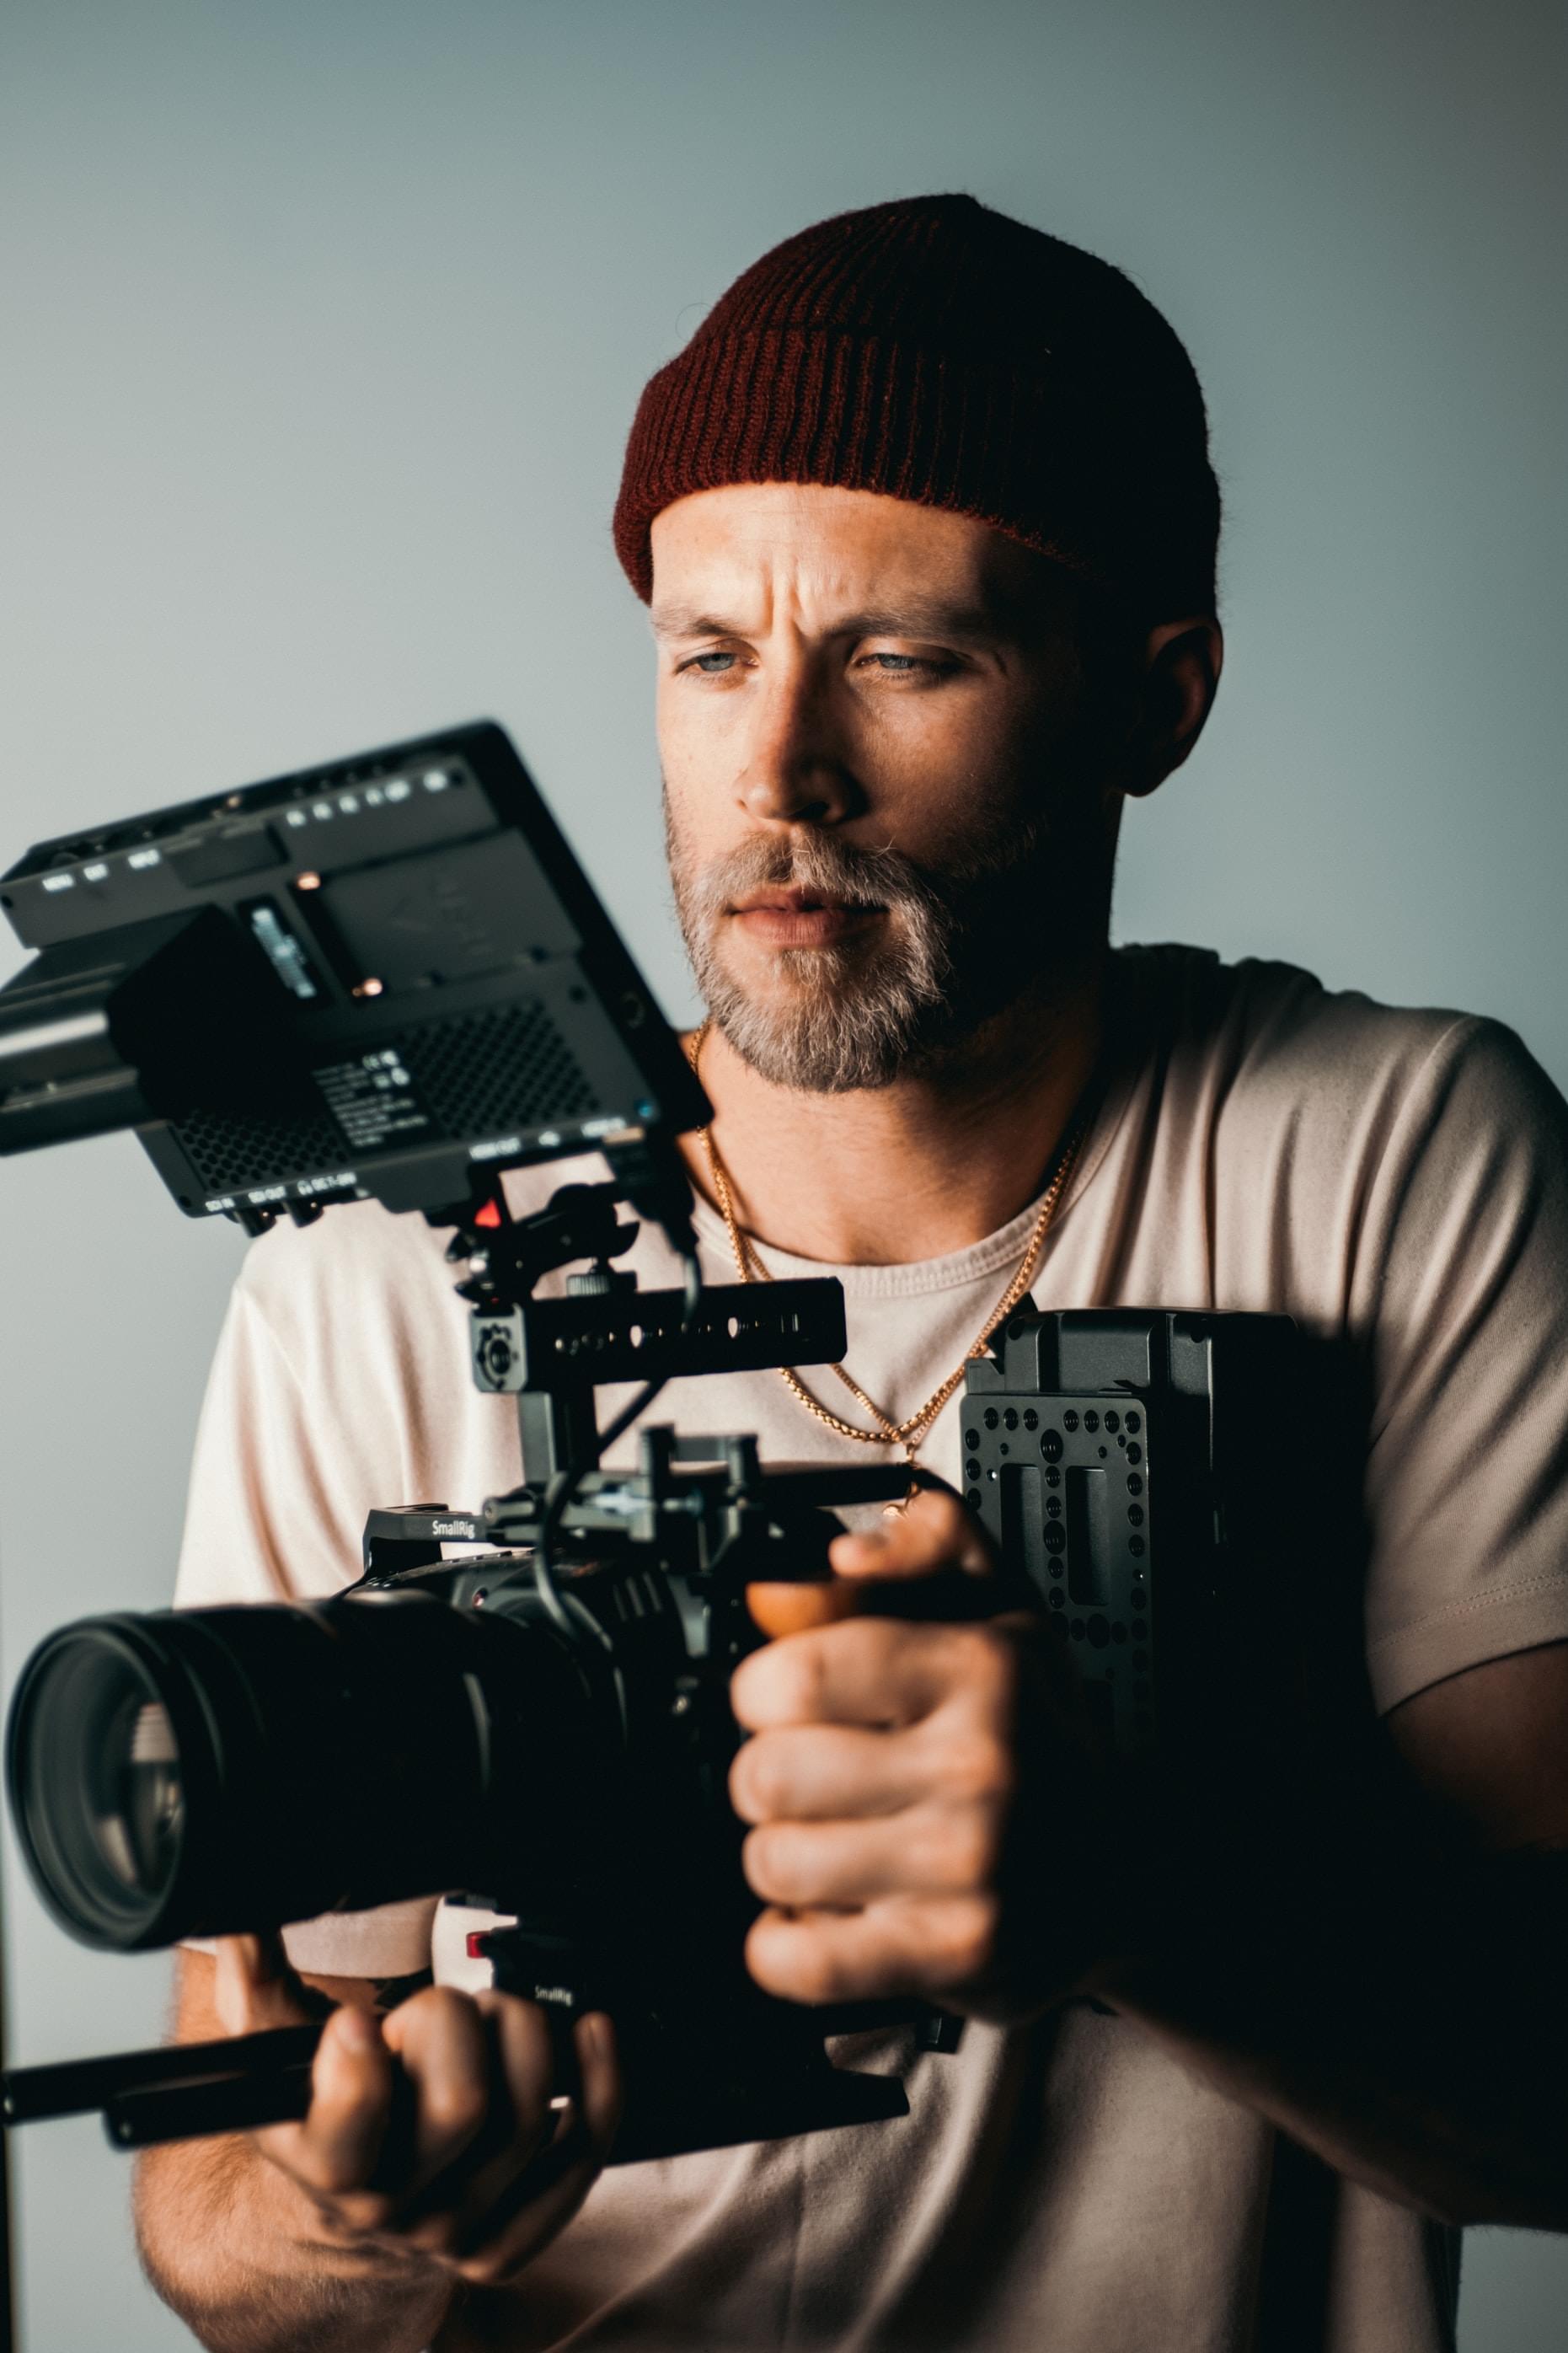 A professional photographer holding a camera, concentrating, wearing a maroon hat in front of a gray background